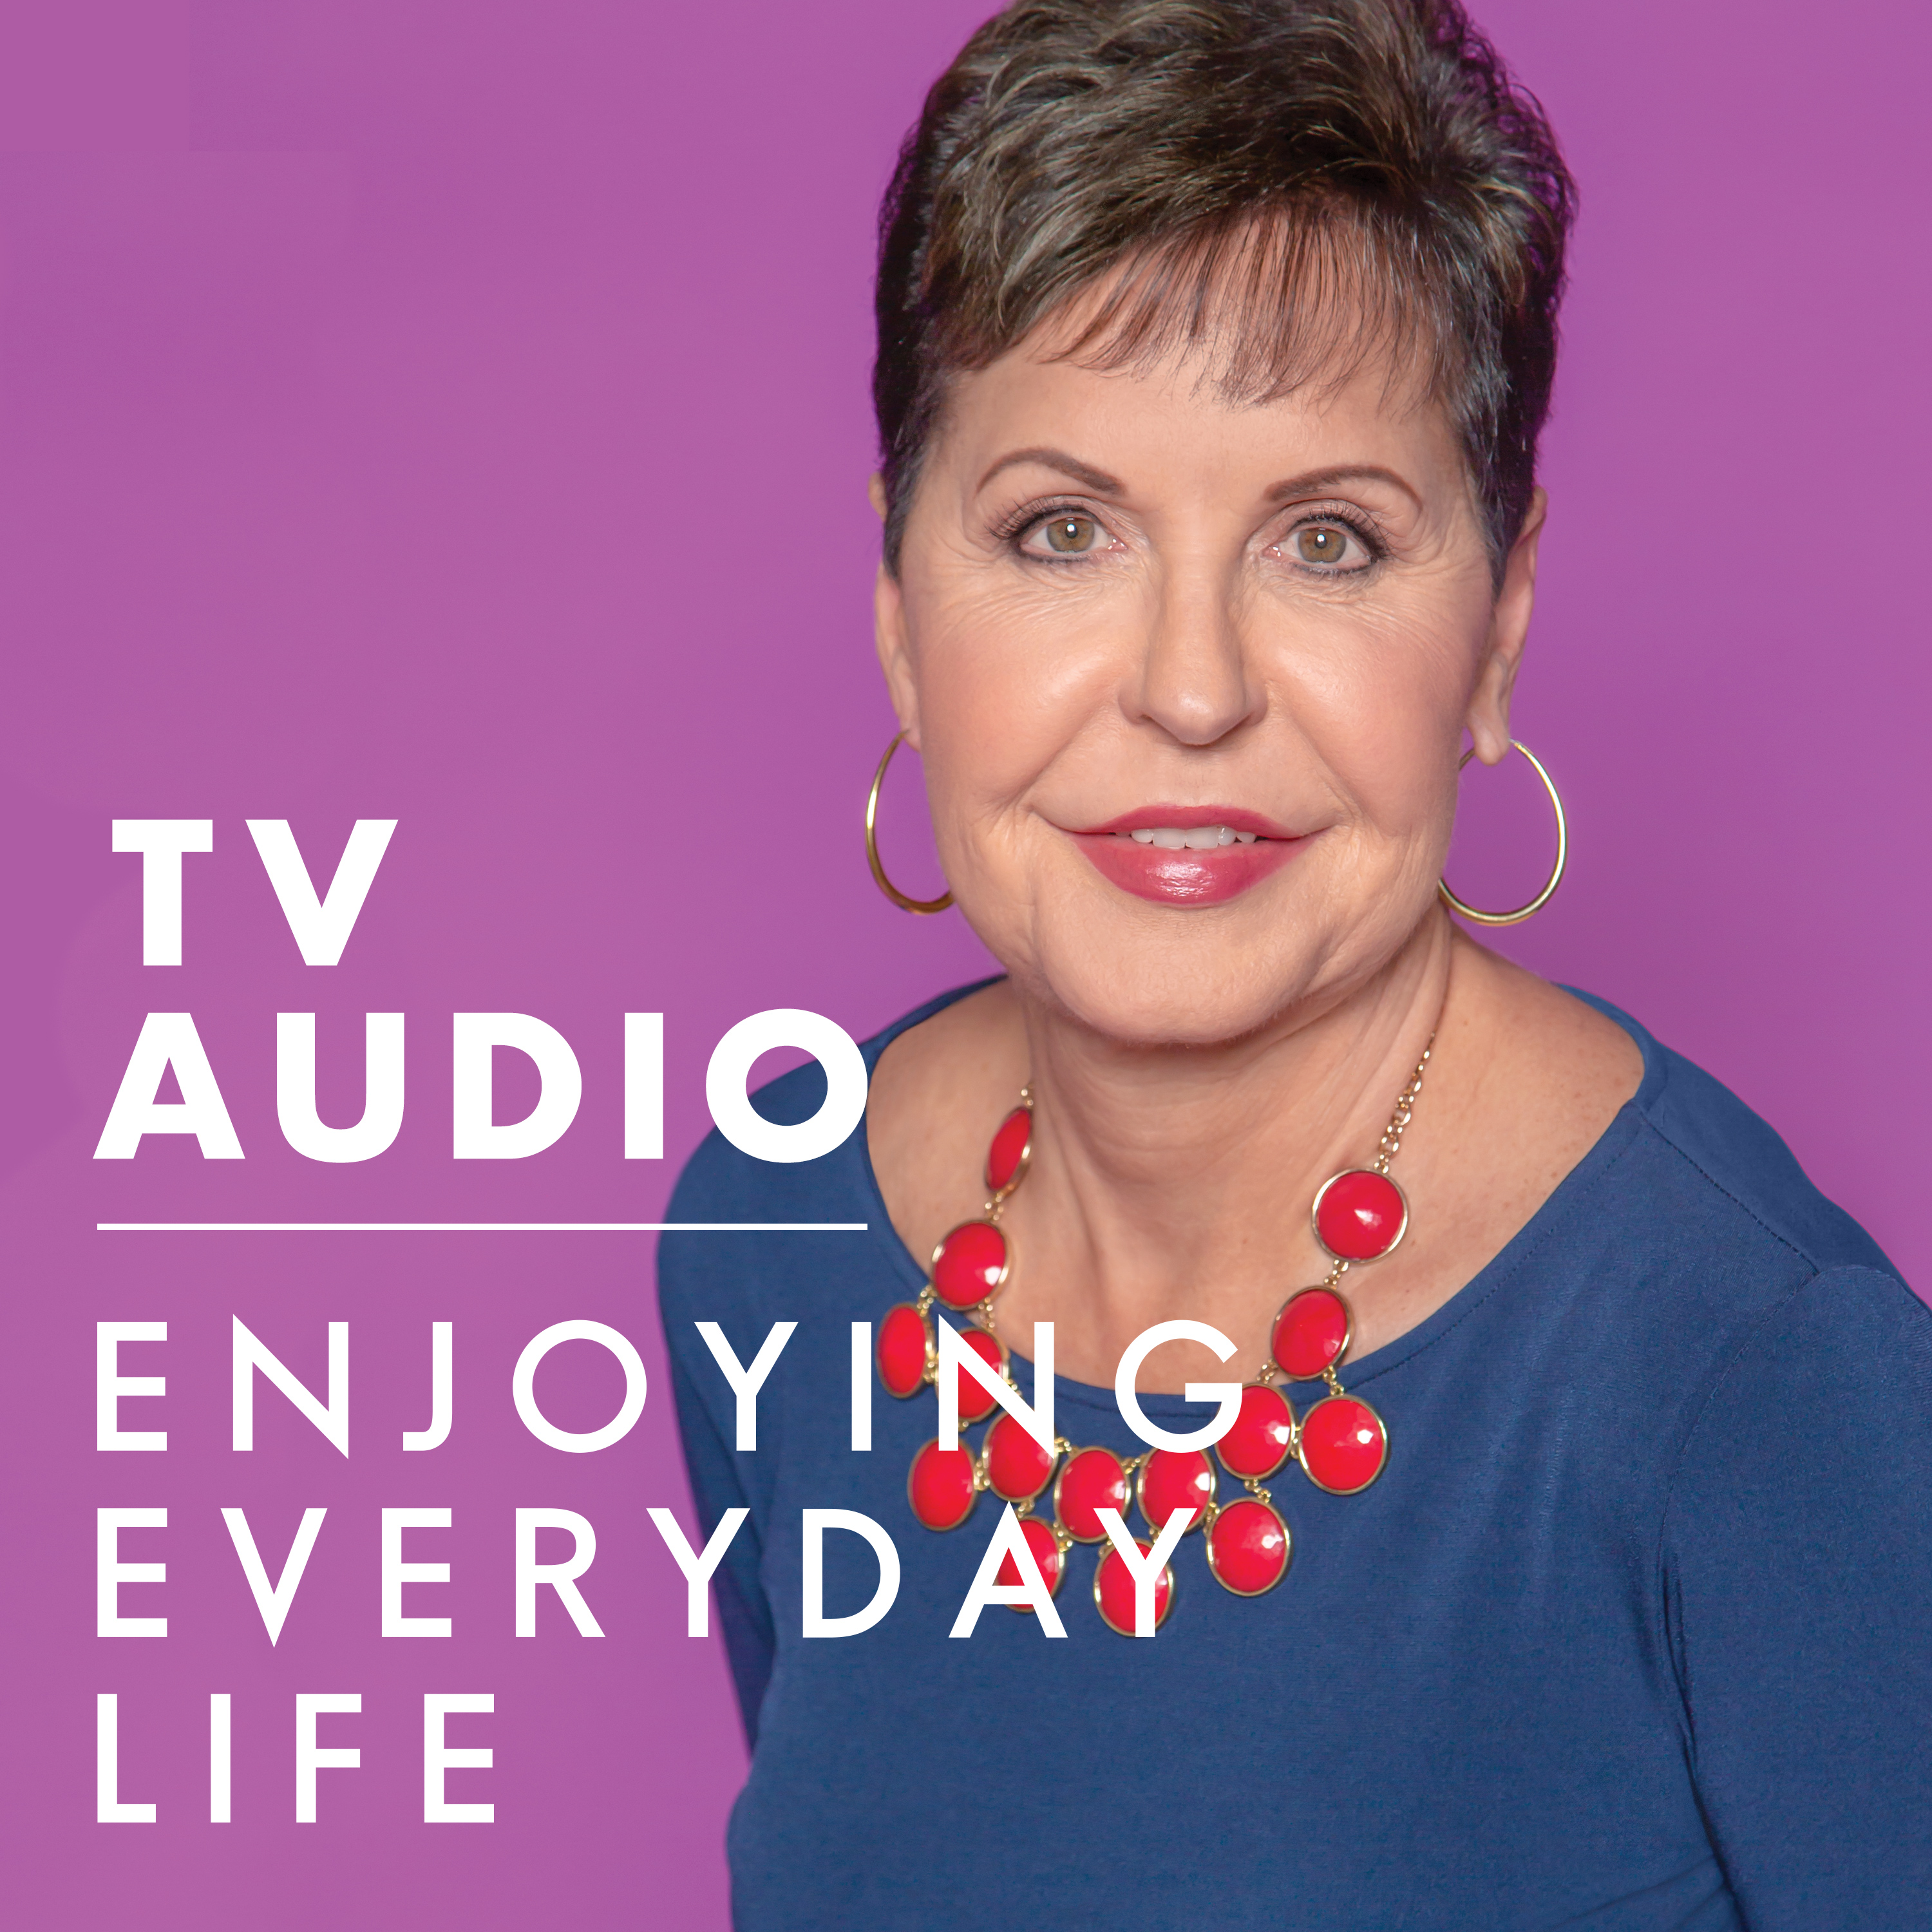 Never give up by joyce meyer free download full